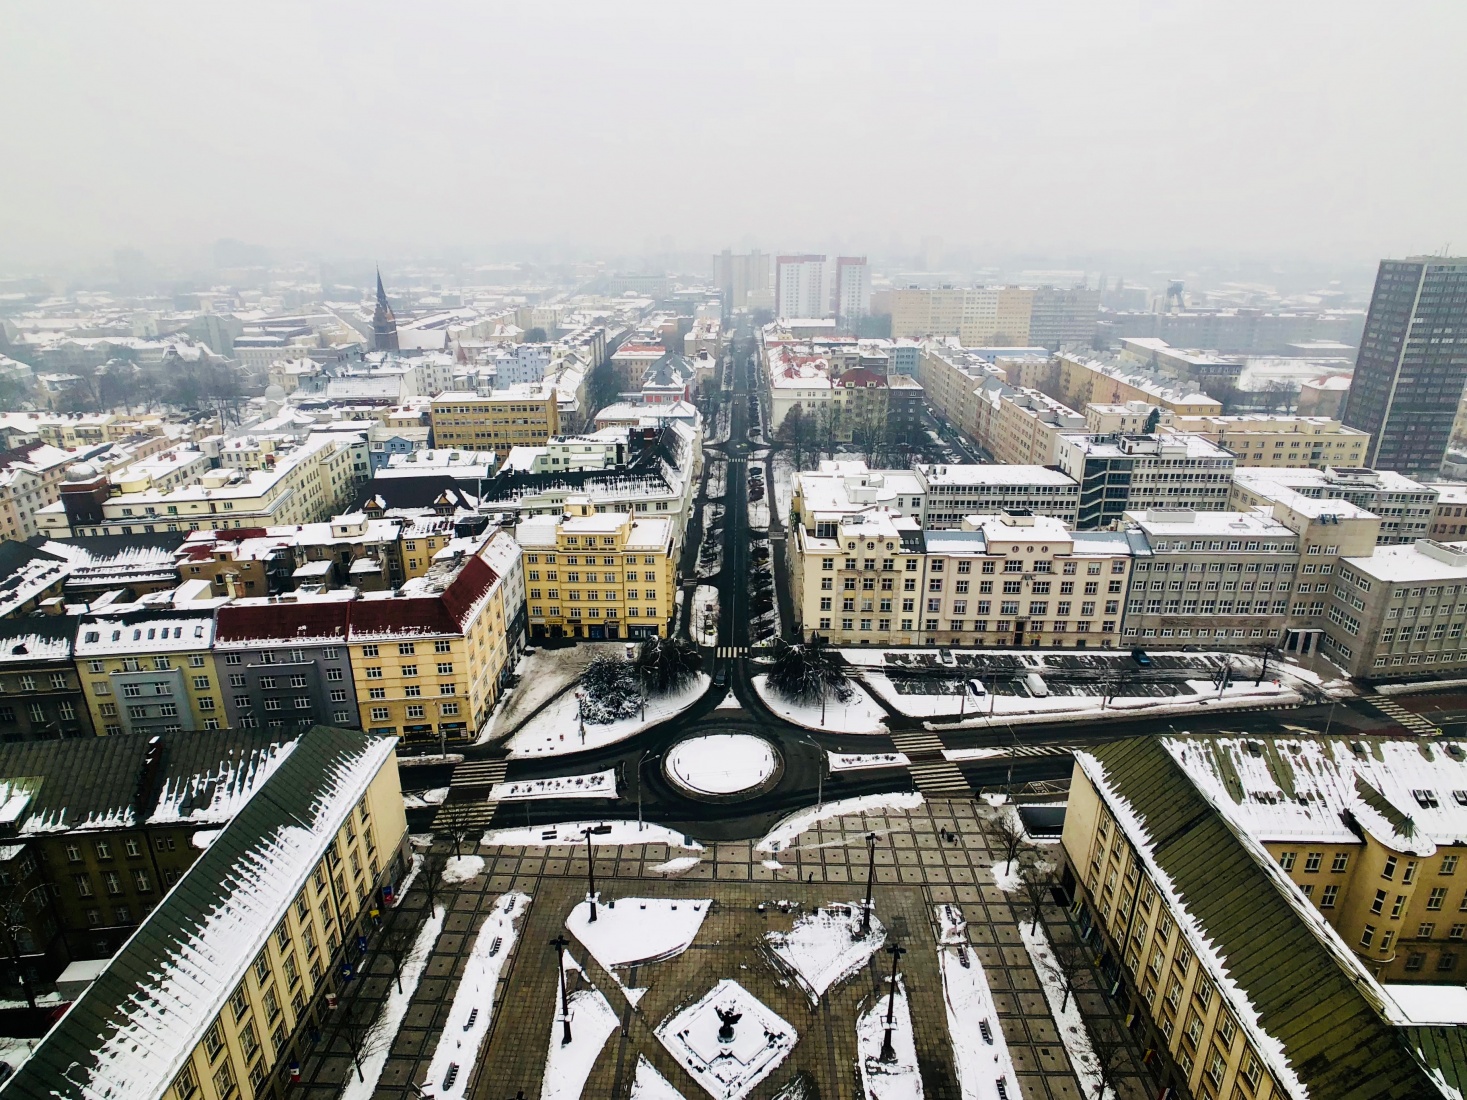 The view toward the center of Ostrava, Czech Republic, from atop the New Town Hall tower.